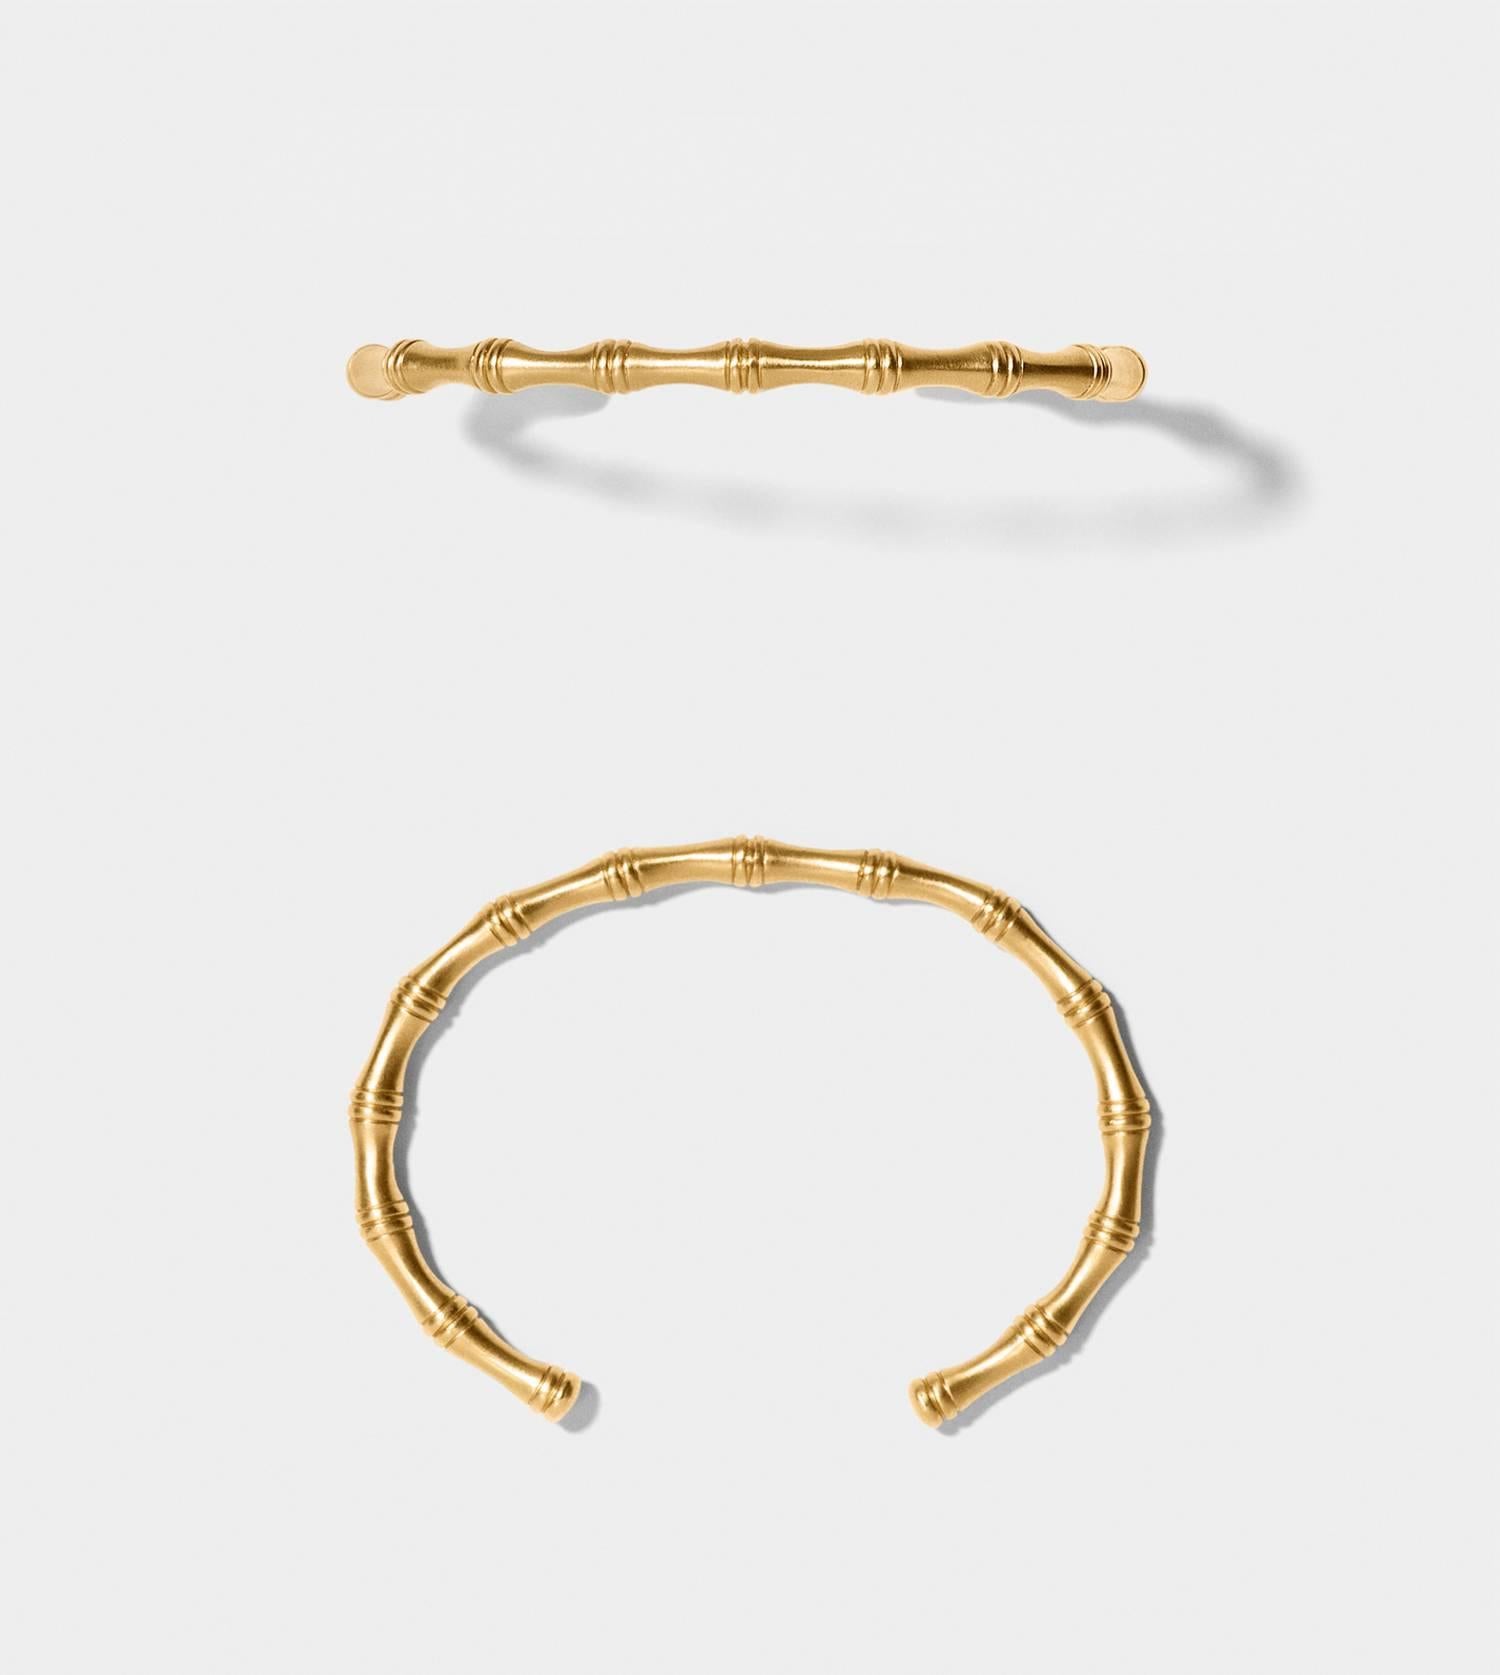 MISS BEDELIA
Open bangle of silk matte 14 karat solid gold.     
Inspired by the elegant and iconic lifestyle of colonial India and Karen Blixen's Africa, BAMBOO COLLECTION is nature and history turned into fine jewellery. Exquisite bamboo furniture